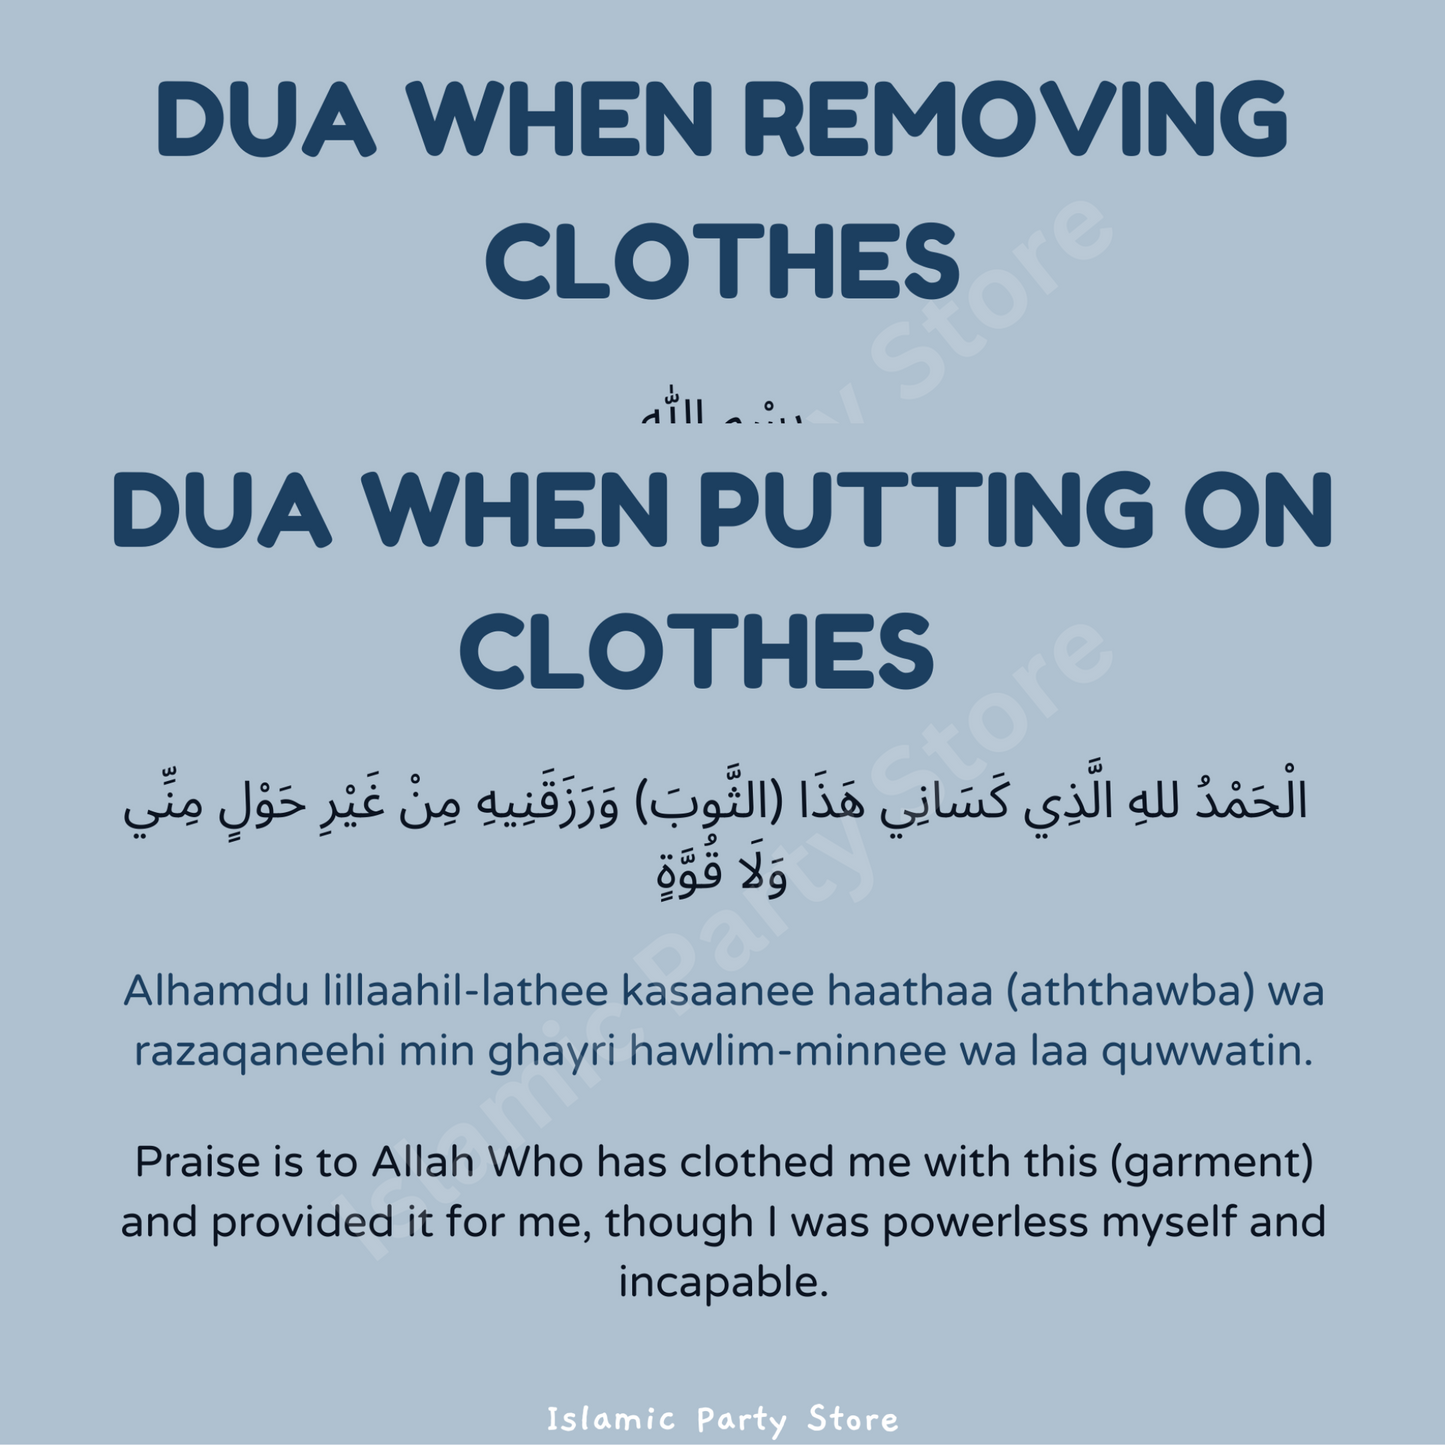 Putting On & Removing Clothes Dua